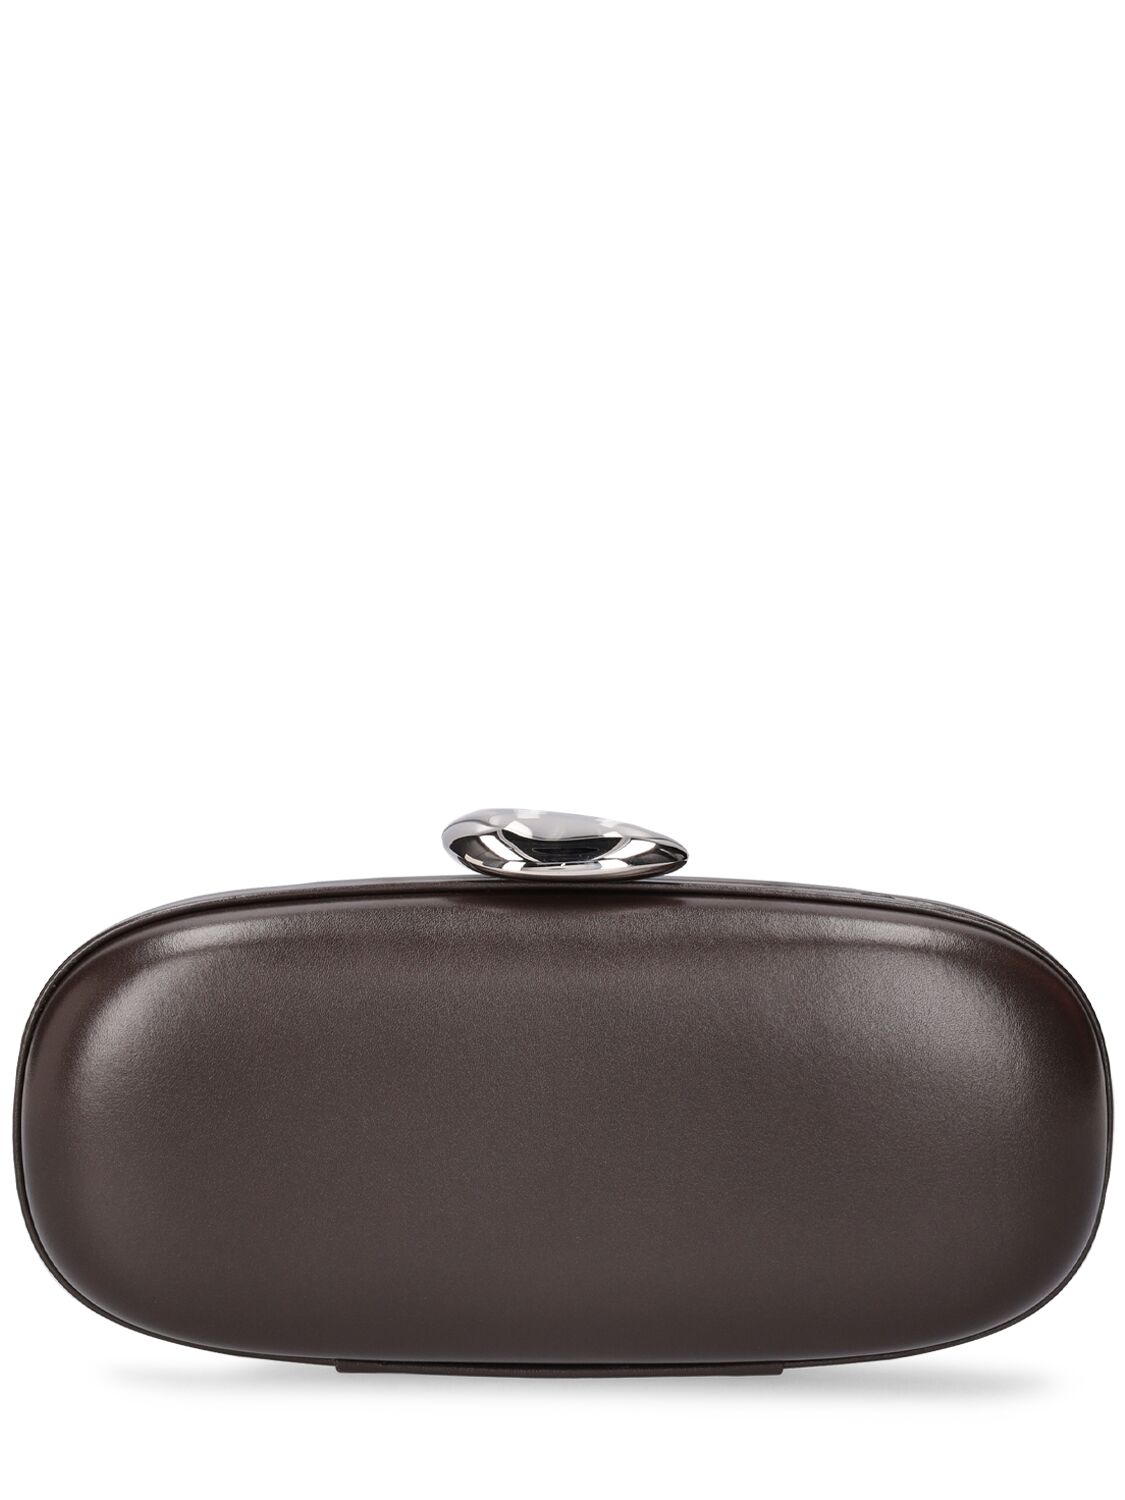 Michael Kors Tina Minaudiere Leather Clutch In Chocolate